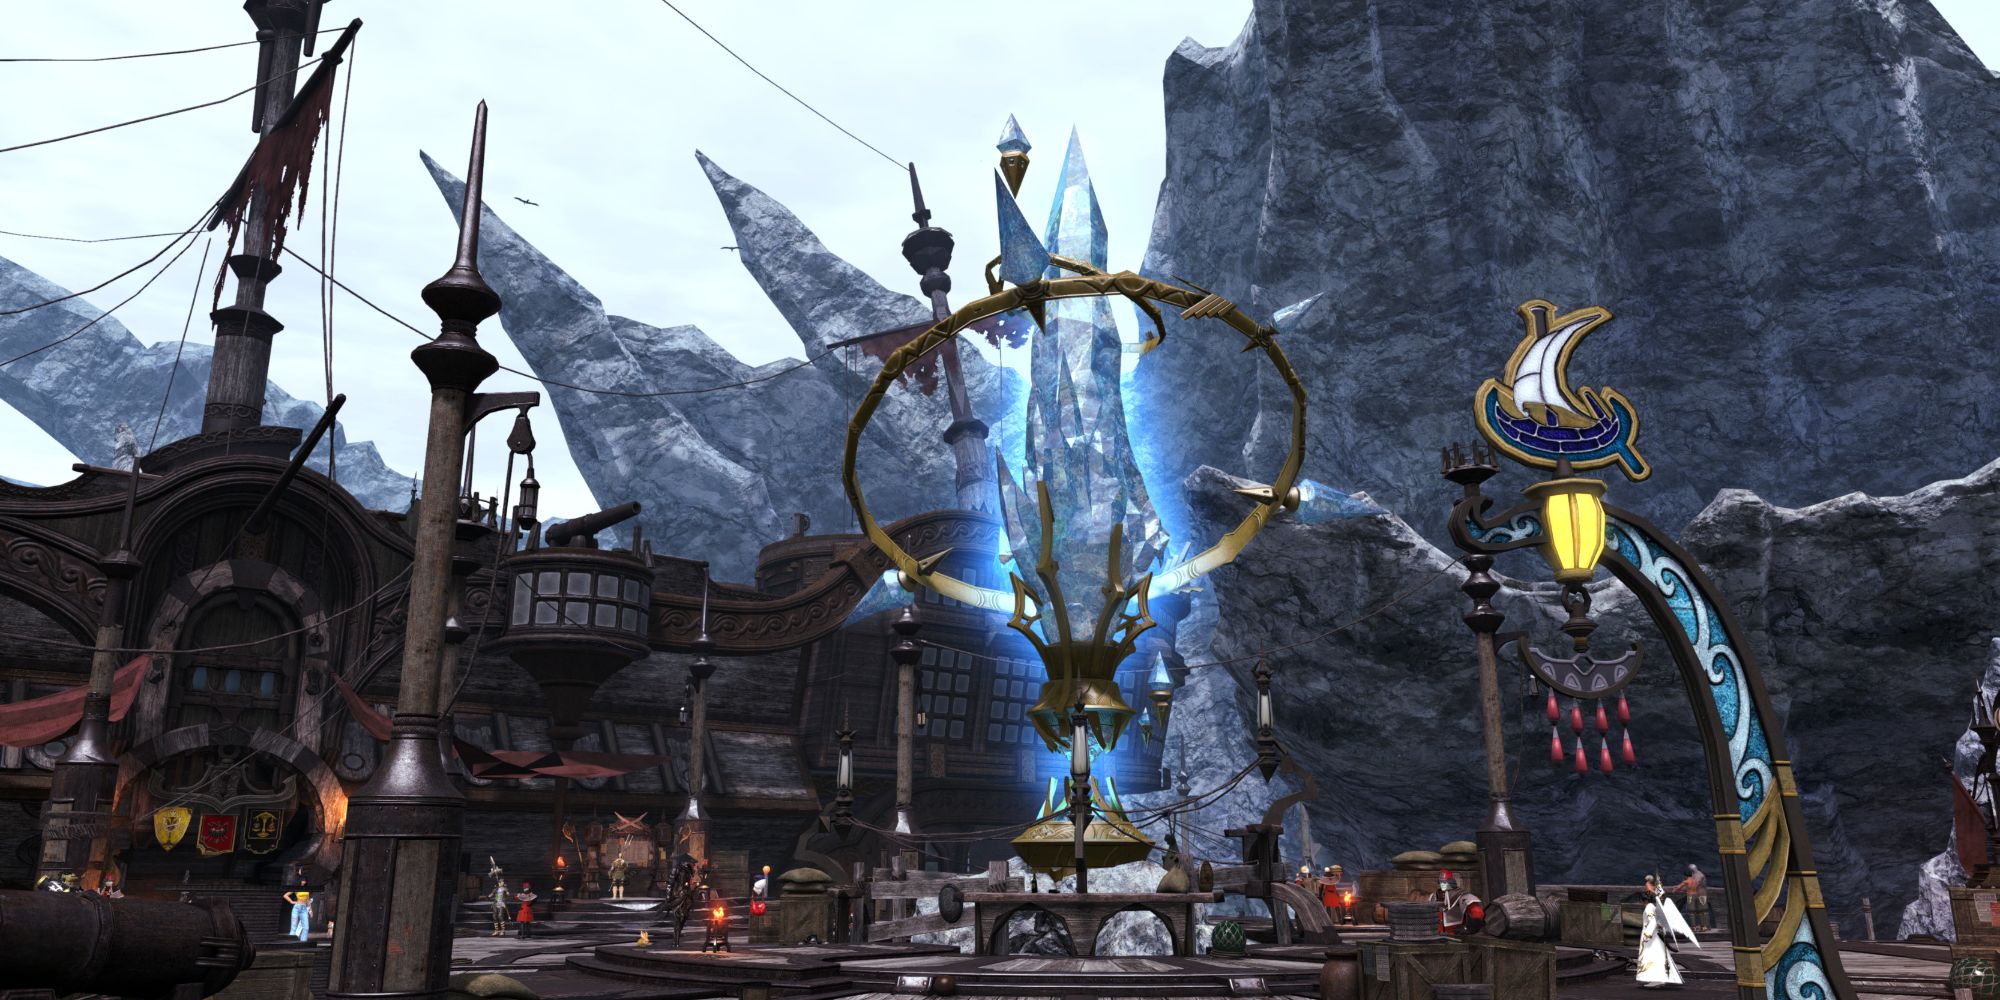 The Wolves' Den Pier Aetheryte. A large blue crystal in the middle of the deck of an enormous ship, crowded with players looking for PvP battles in Final Fantasy 14.